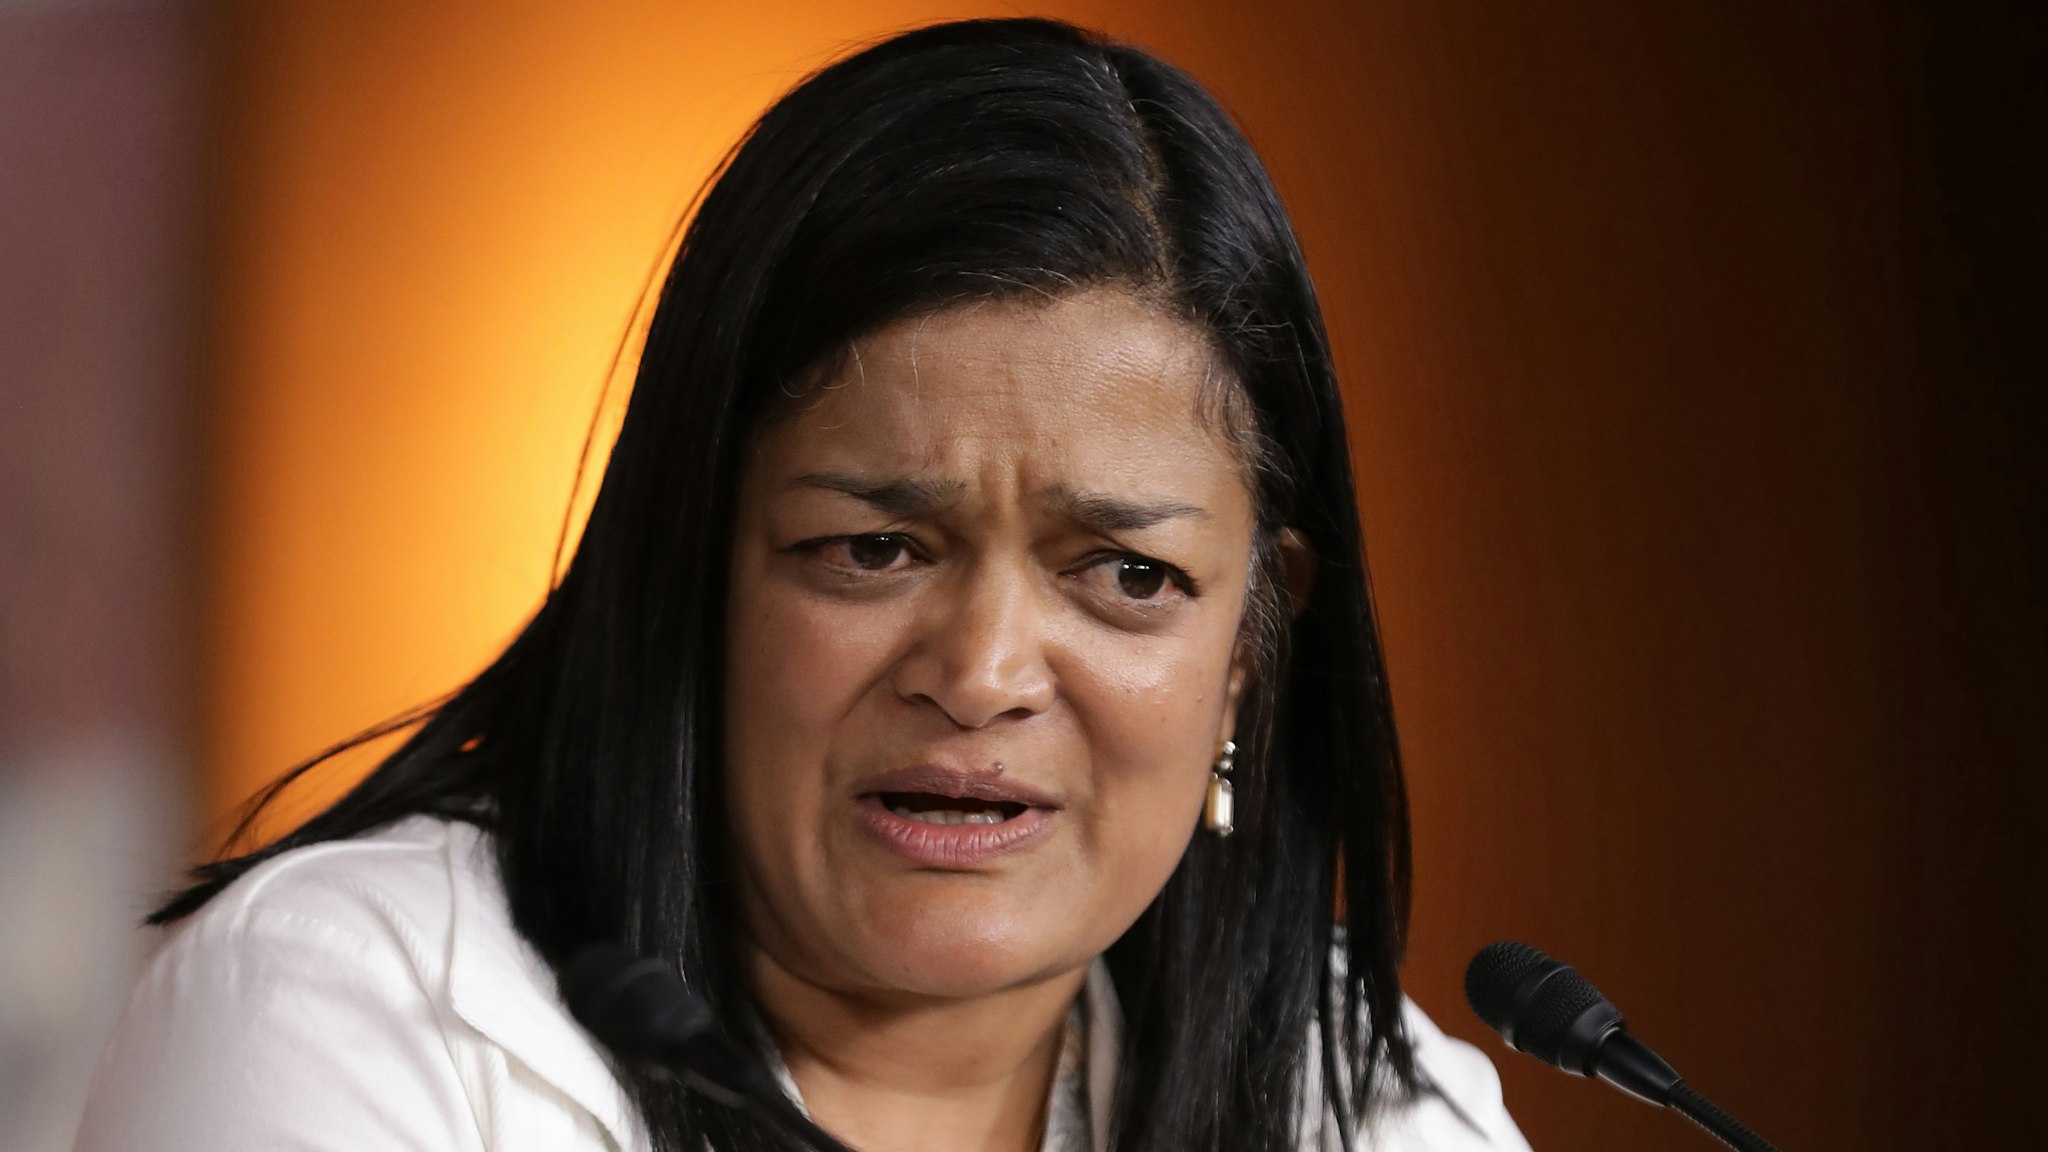 WASHINGTON, DC - MAY 17: Congressional Progressive Caucus co-chair Rep. Pramila Jayapal (D-WA) holds a news conference in the U.S. Capitol Visitors Center May 17, 2019 in Washington, DC. Jayapal and co-chair Rep. Mark Pocan (D-WI) talked about prescription drug prices, the Equality Act and other topics.